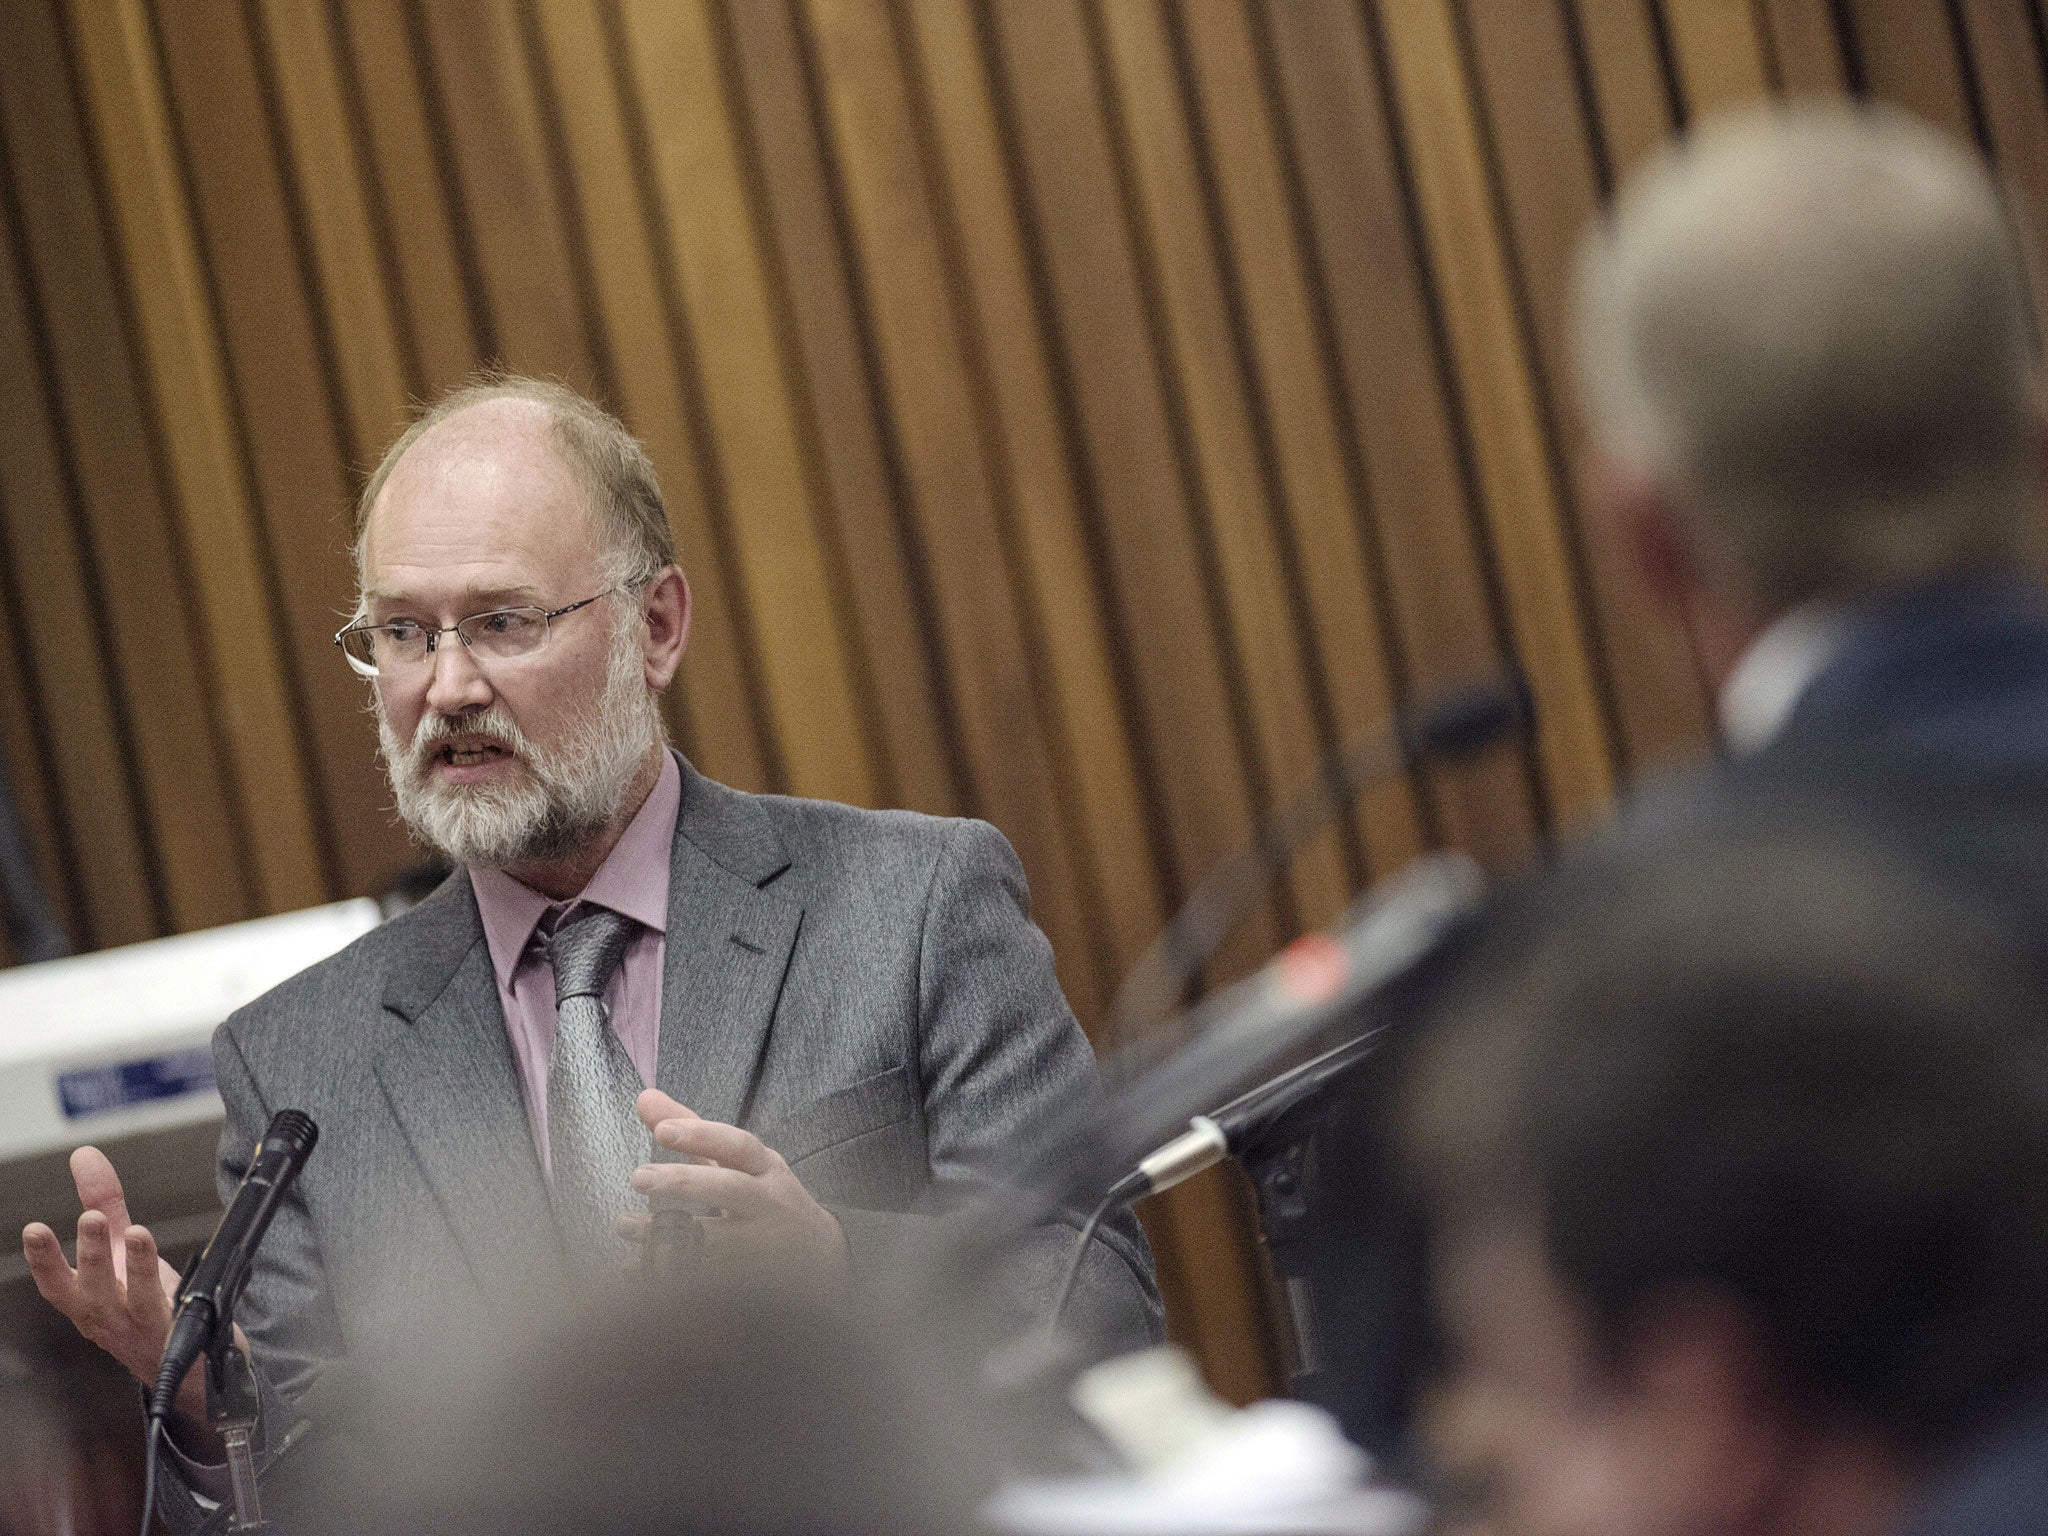 Forensic Expert Roger Dixon (L) answers to questions from State Prosecutor during the Oscar Pistorius trial at the North Gauteng High Court on April 16, 2014